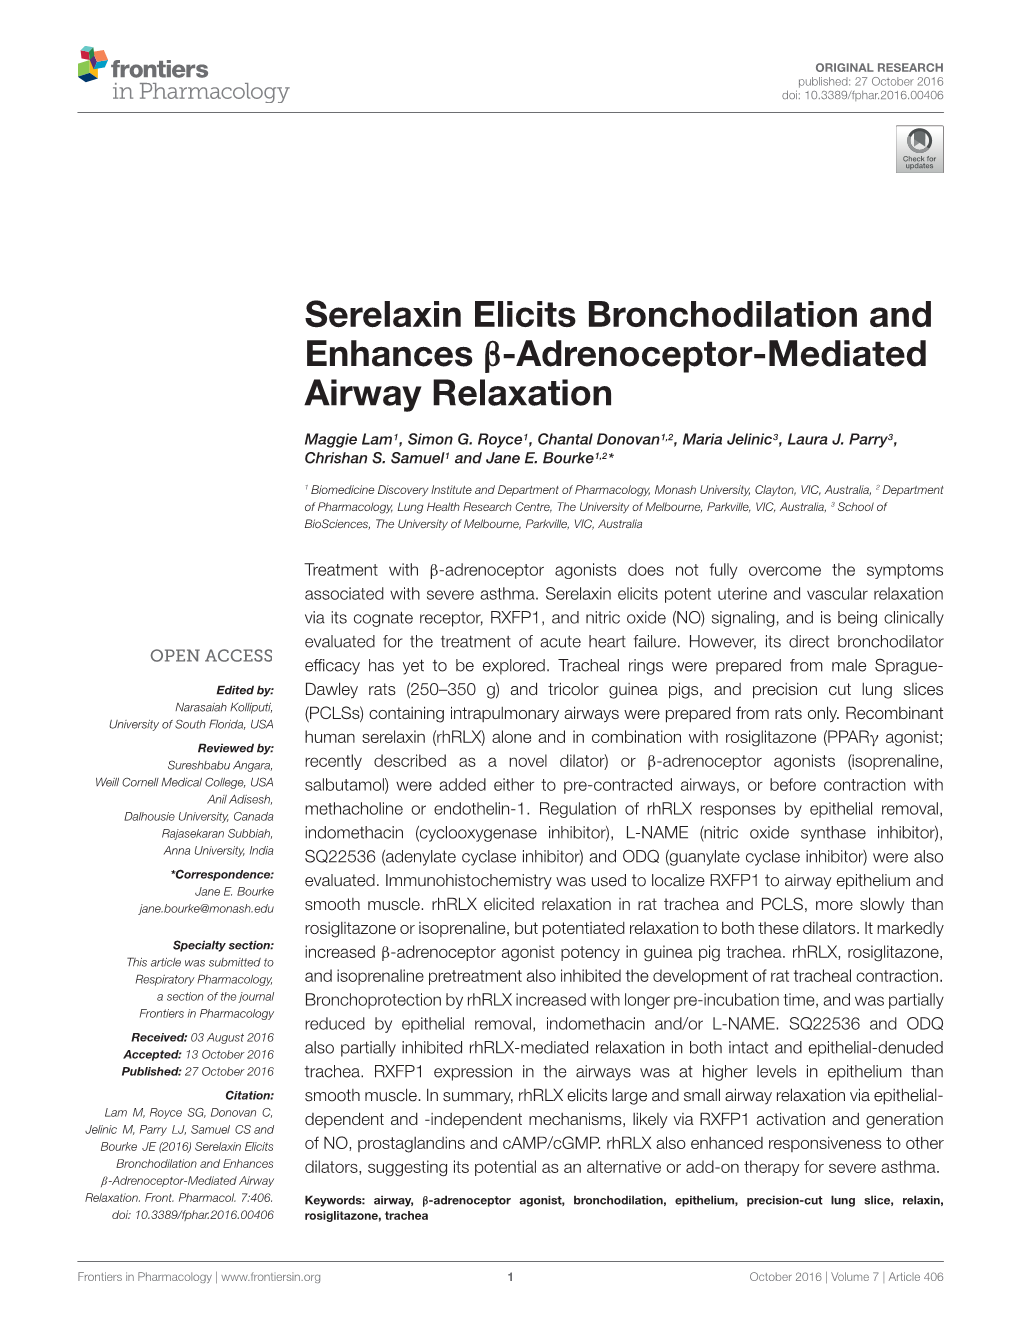 Serelaxin Elicits Bronchodilation and Enhances Β-Adrenoceptor-Mediated Airway Relaxation